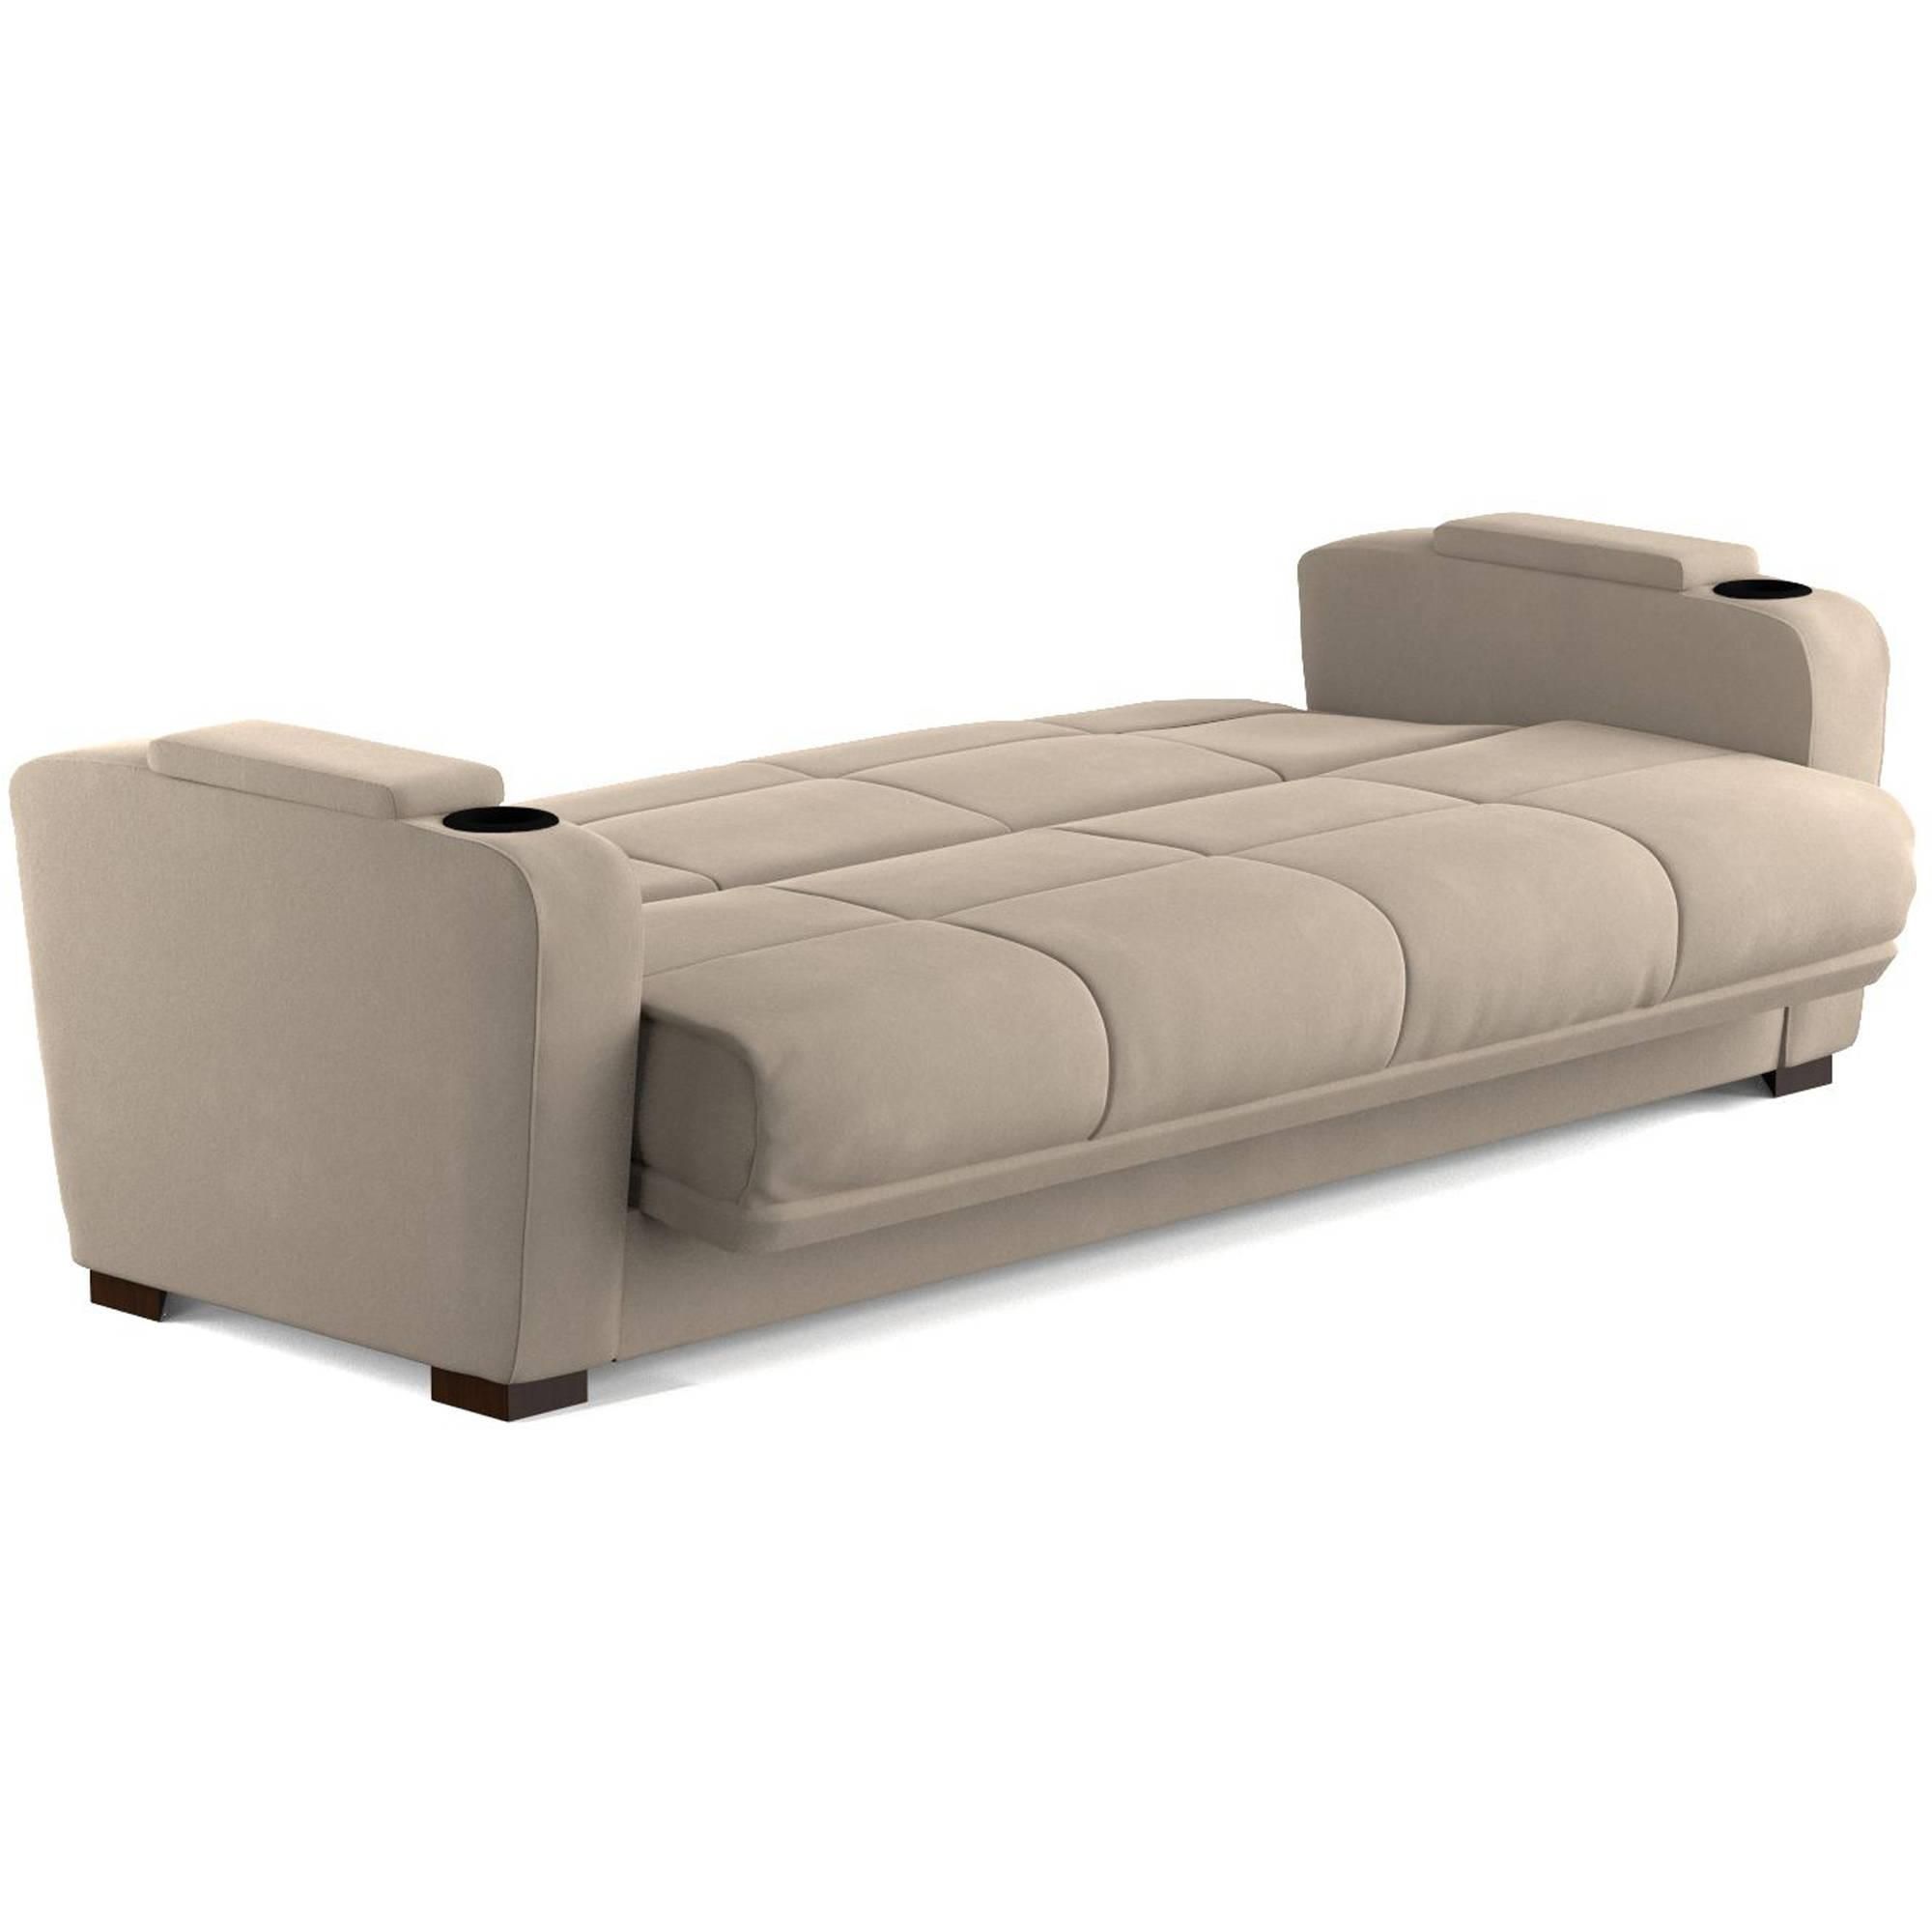 Mainstays Tyler Futon With Storage Sofa Sleeper Bed, Multiple Pertaining To Sofa Beds With Storages (Photo 16 of 20)